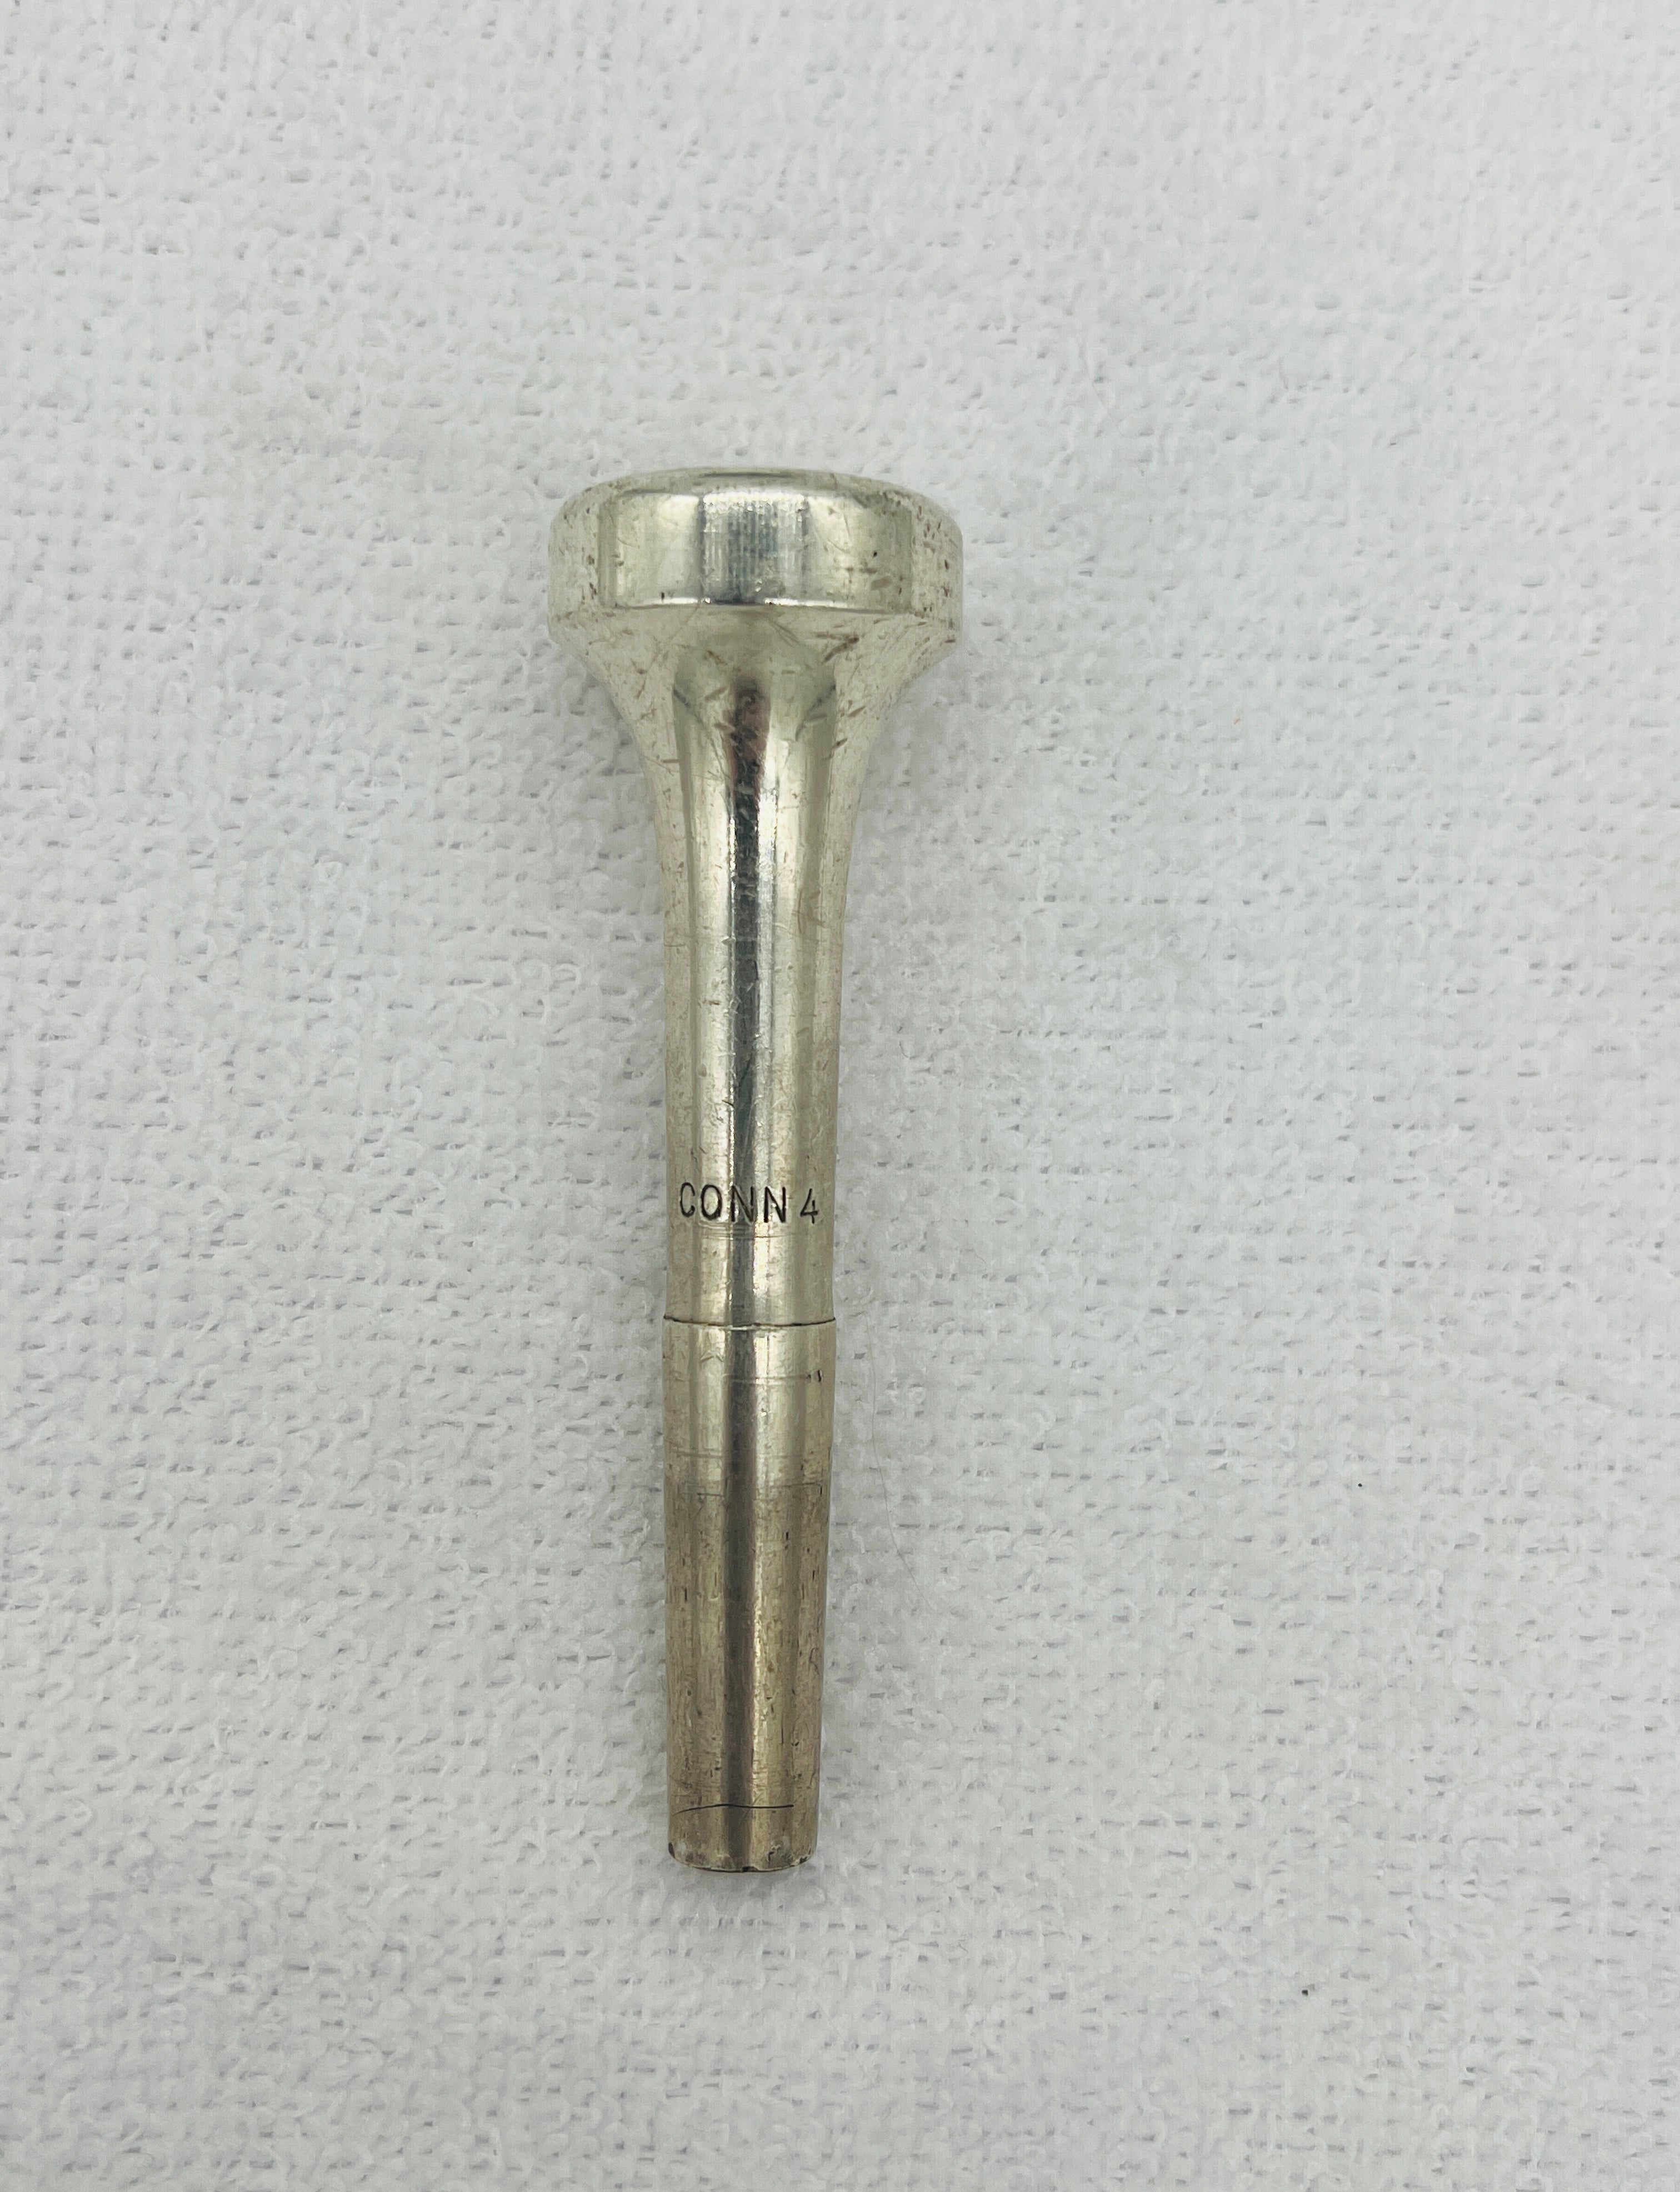 CONN 4 Trumpet Mouthpiece Silver Plated USED